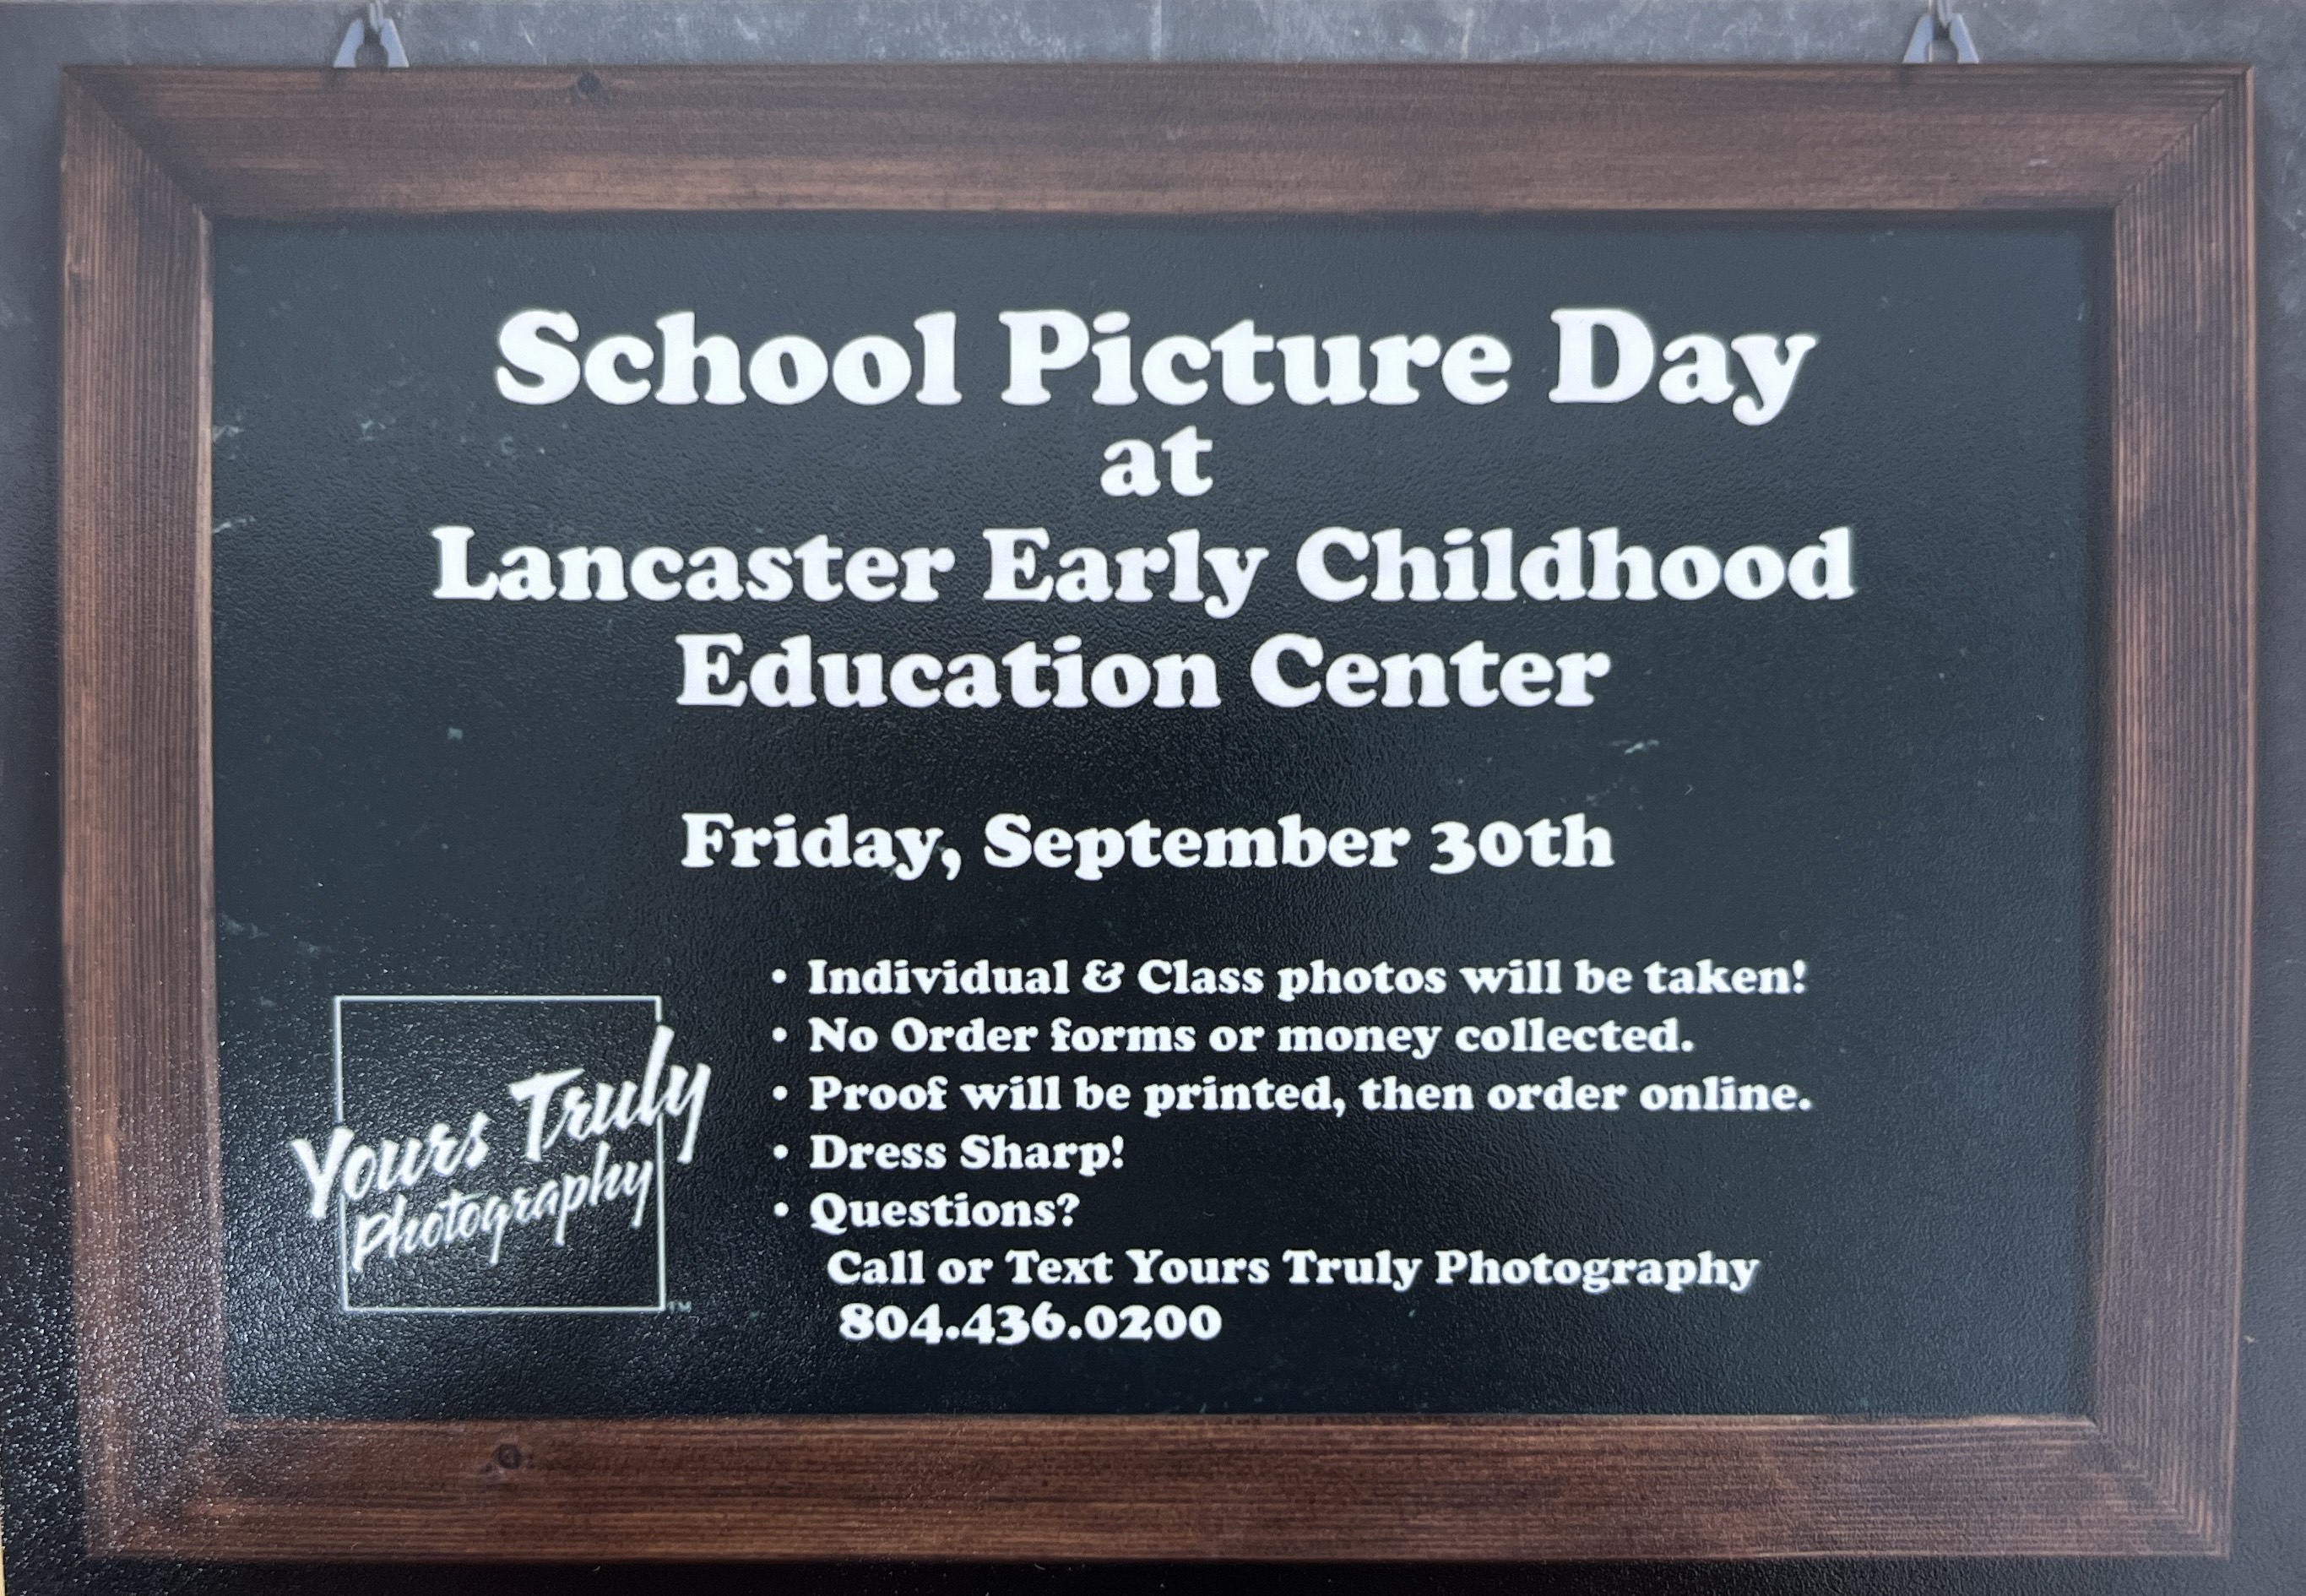 School Picture Day at LECEC is Friday, September 30th. Individual and class photos will be taken. No order forms or money are collected. Proof will be printed, then order online. Dress sharp! Questions? Call or text Yours Truly Photography at 804-436-0200